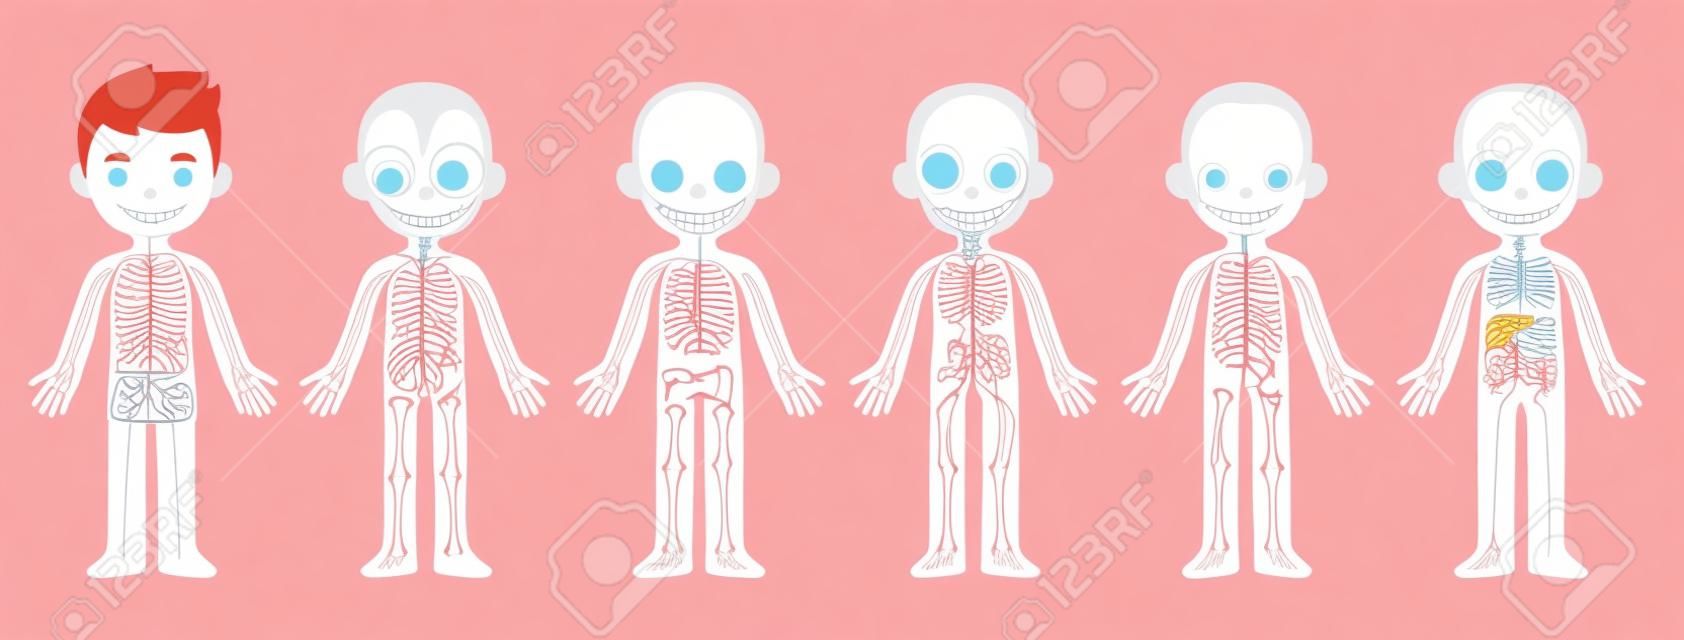 My body, educational anatomy body organ chart for kids. Cute cartoon little boy and his bodily systems: muscular, skeletal, circulatory, nervous and digestive. Isolated vector infographic clip art.